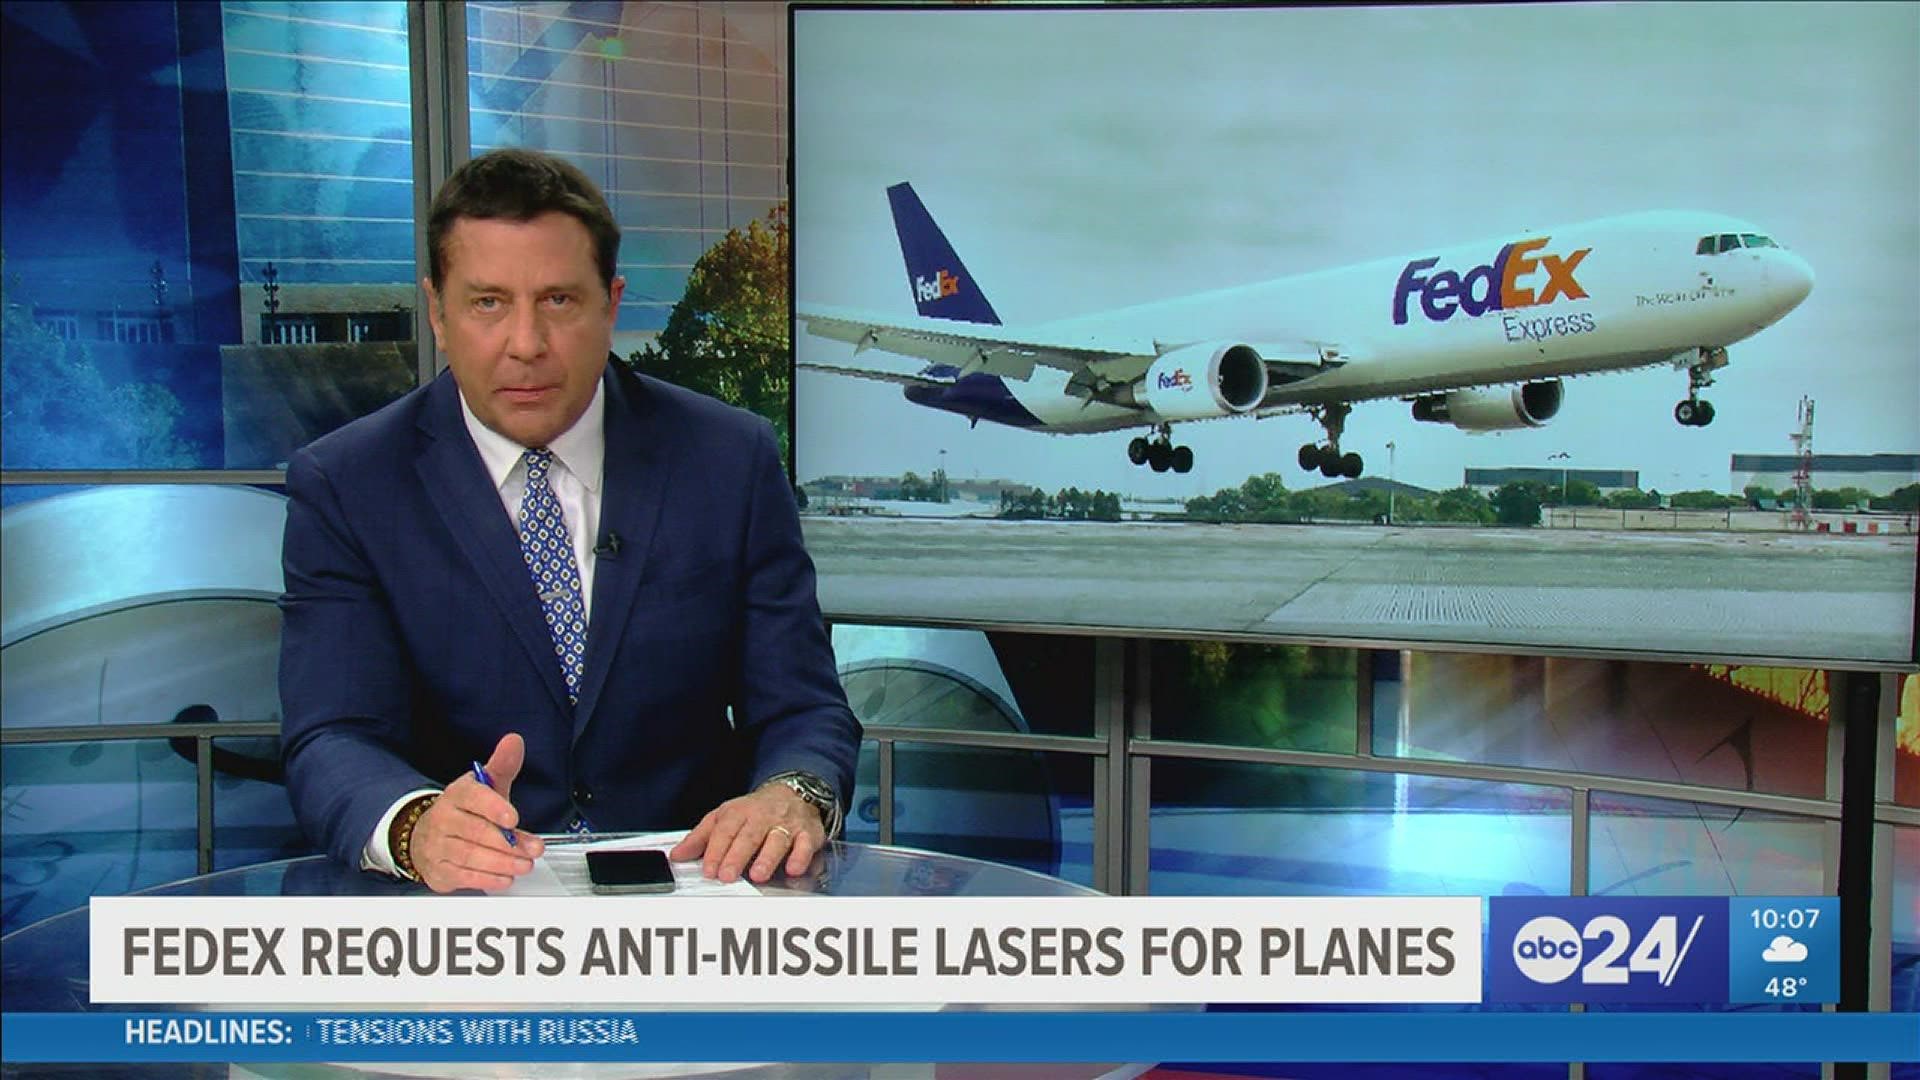 The shipping company is asking for FAA permission to modify some planes with lasers that would misdirect missiles.